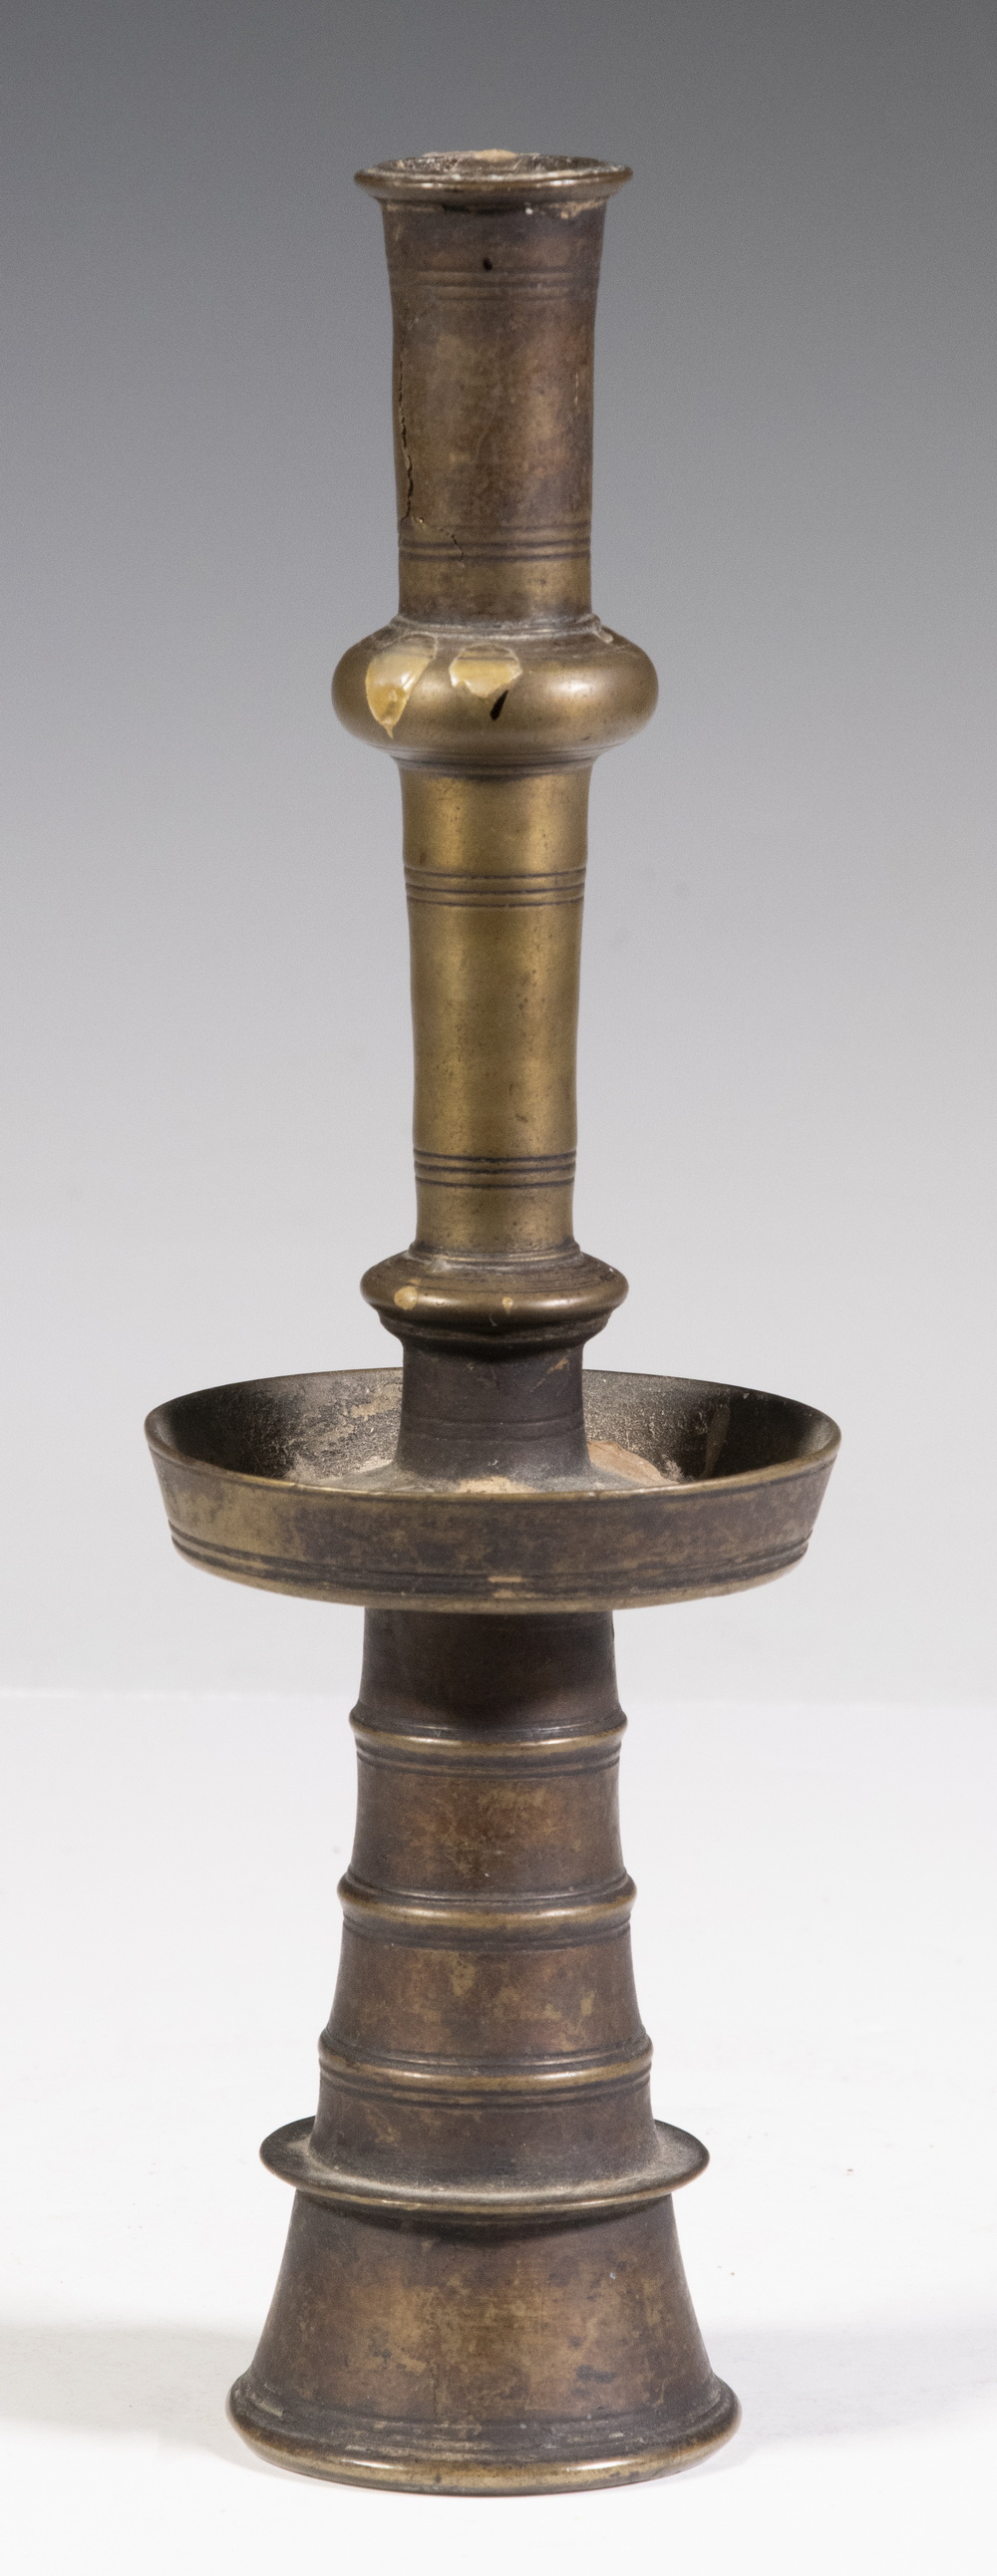 EARLY BRONZE CANDLESTICK 16th -